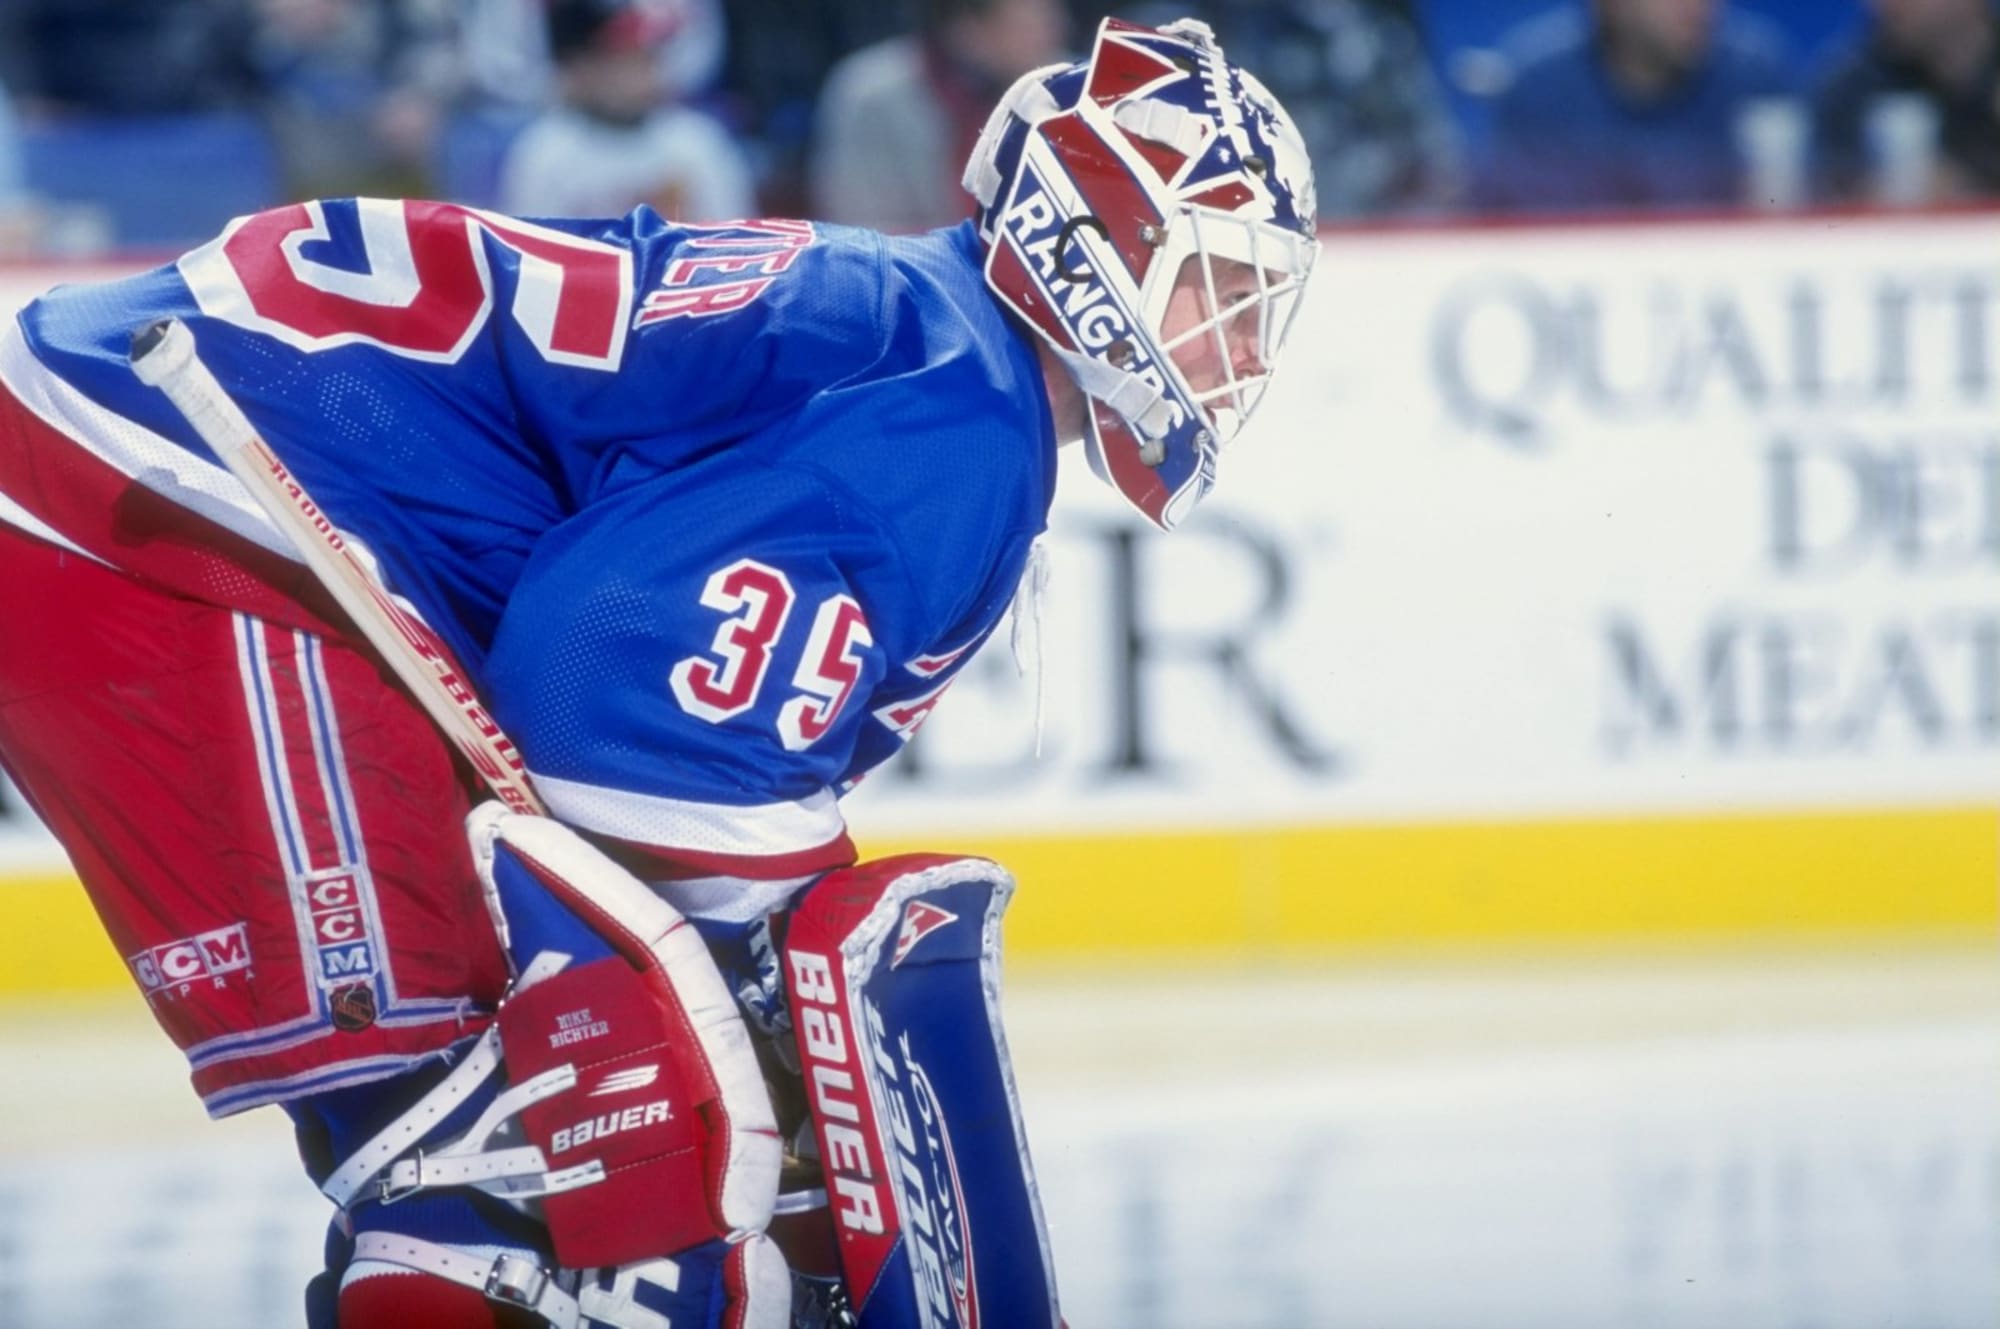 Ex-Rangers great Kevin Lowe has No. 4 Oilers jersey retired